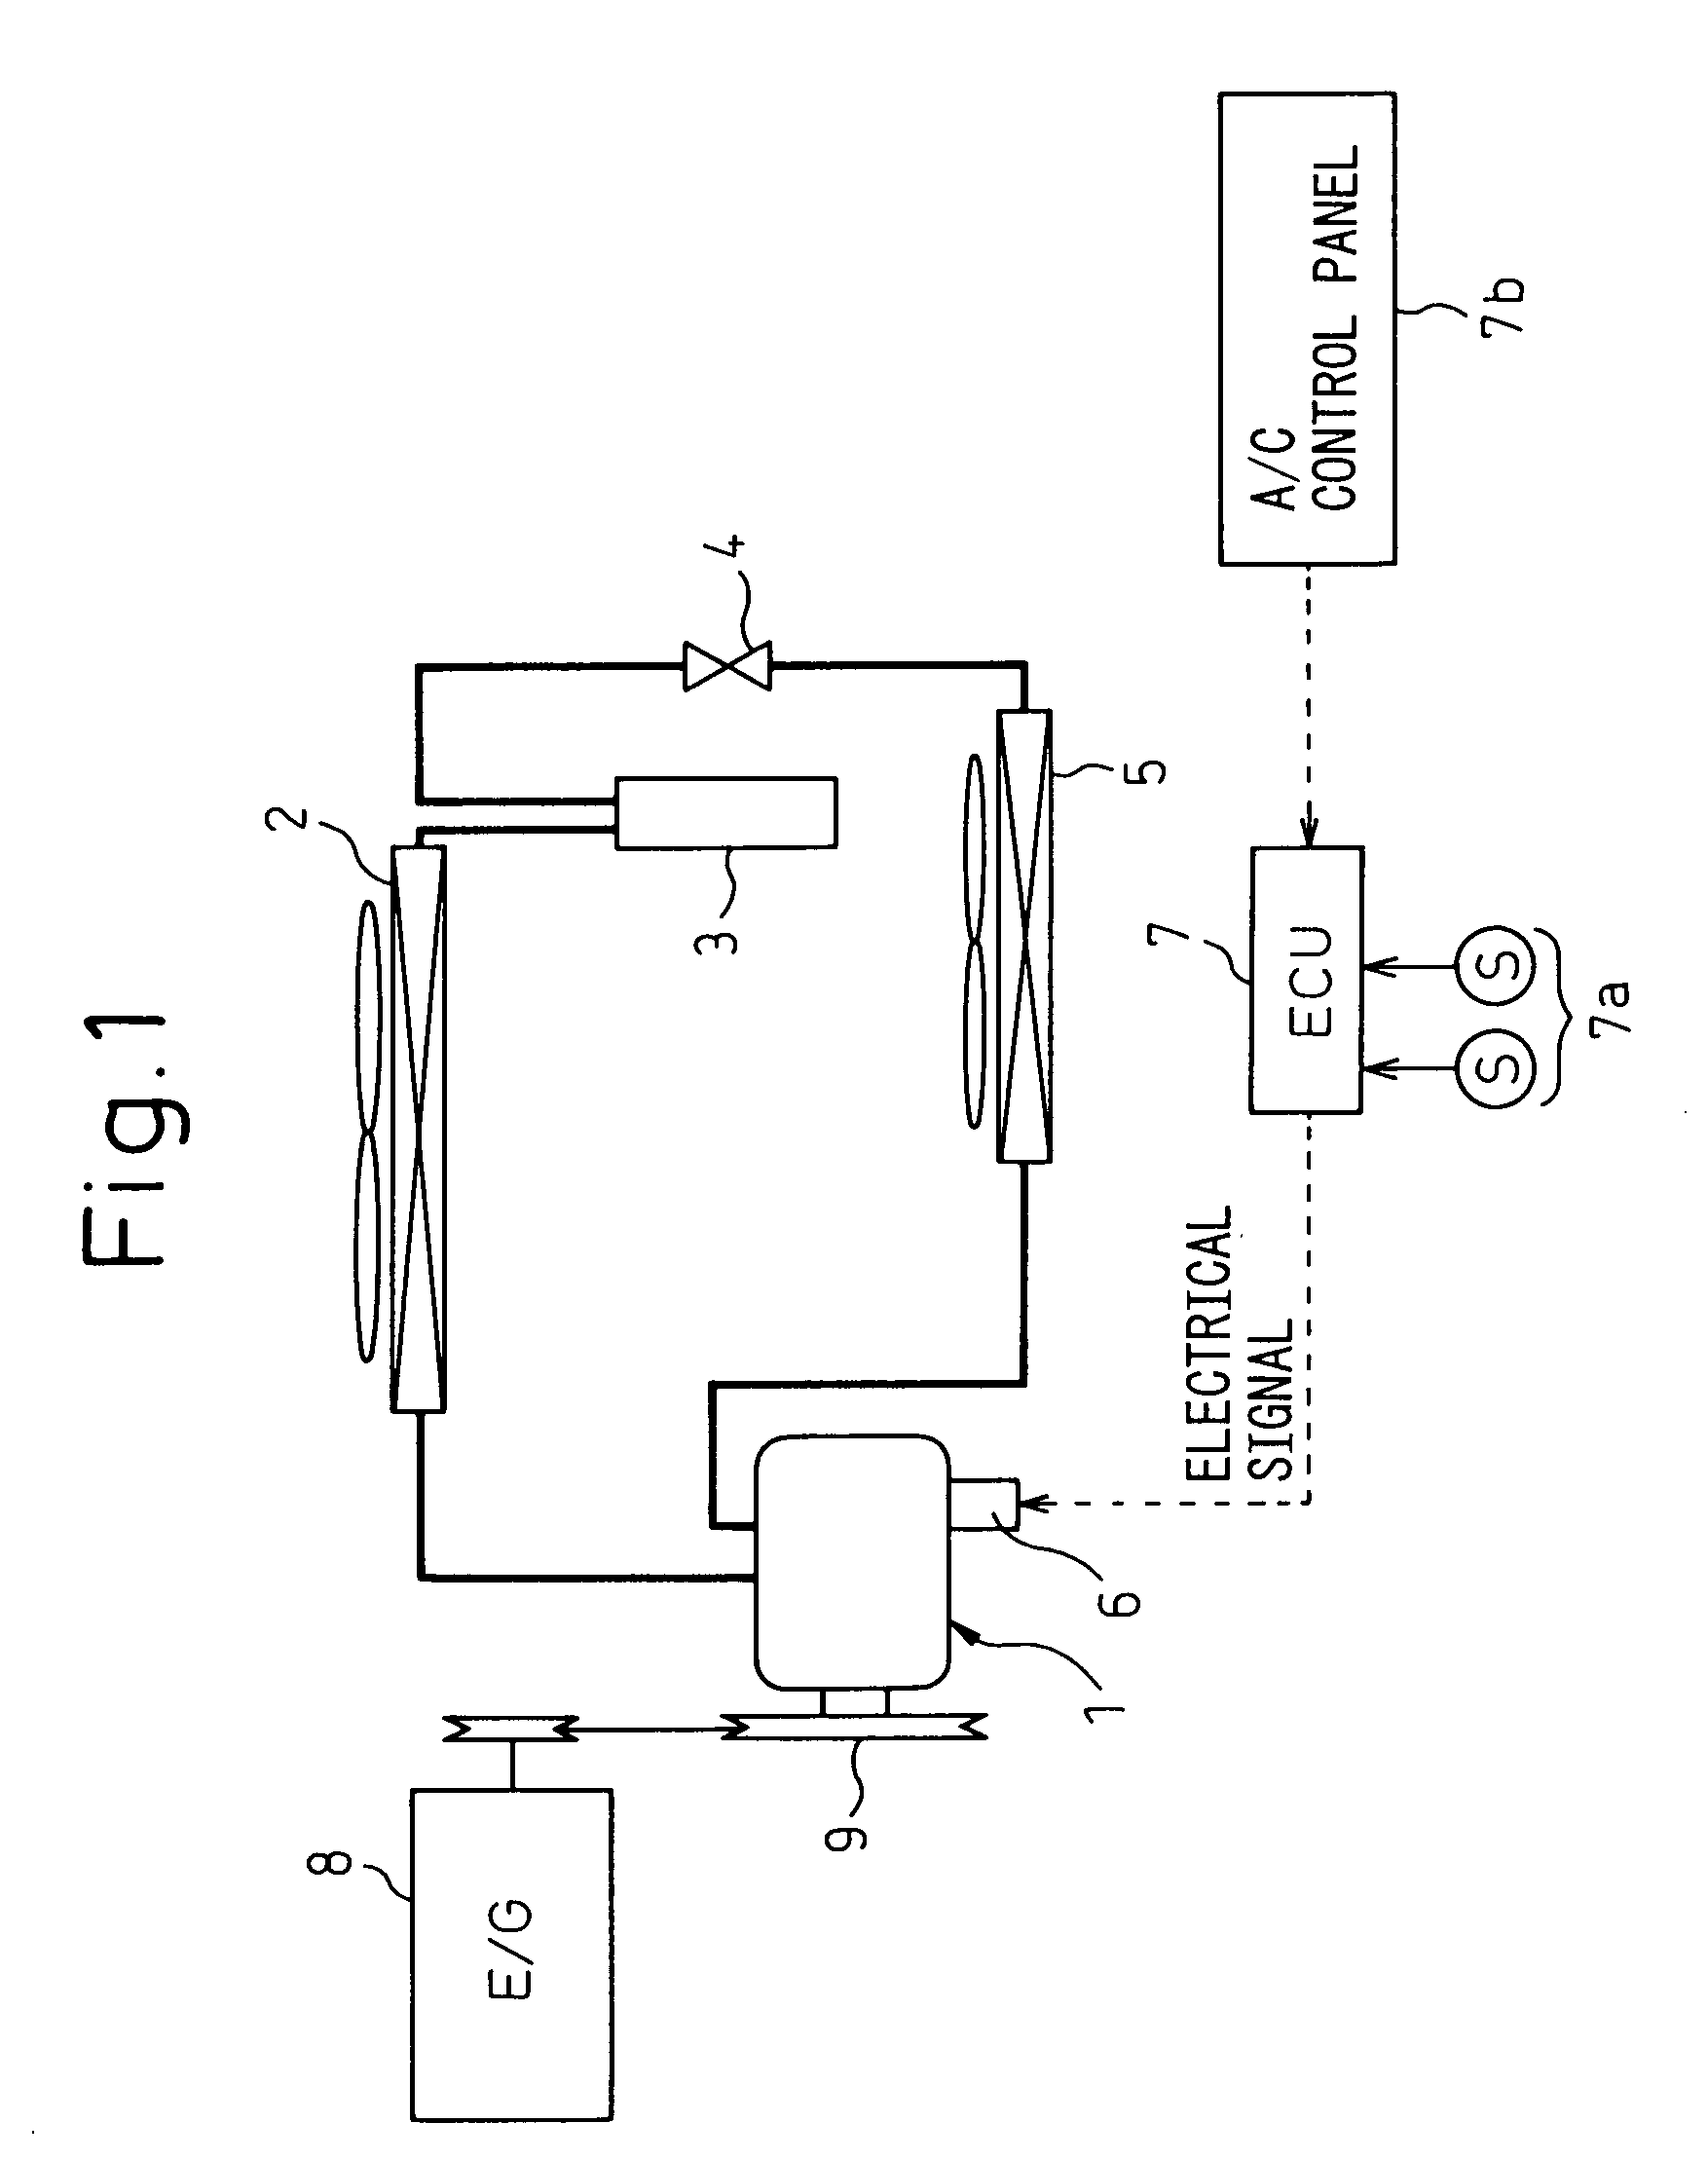 Rotating apparatus with a torque limiter function